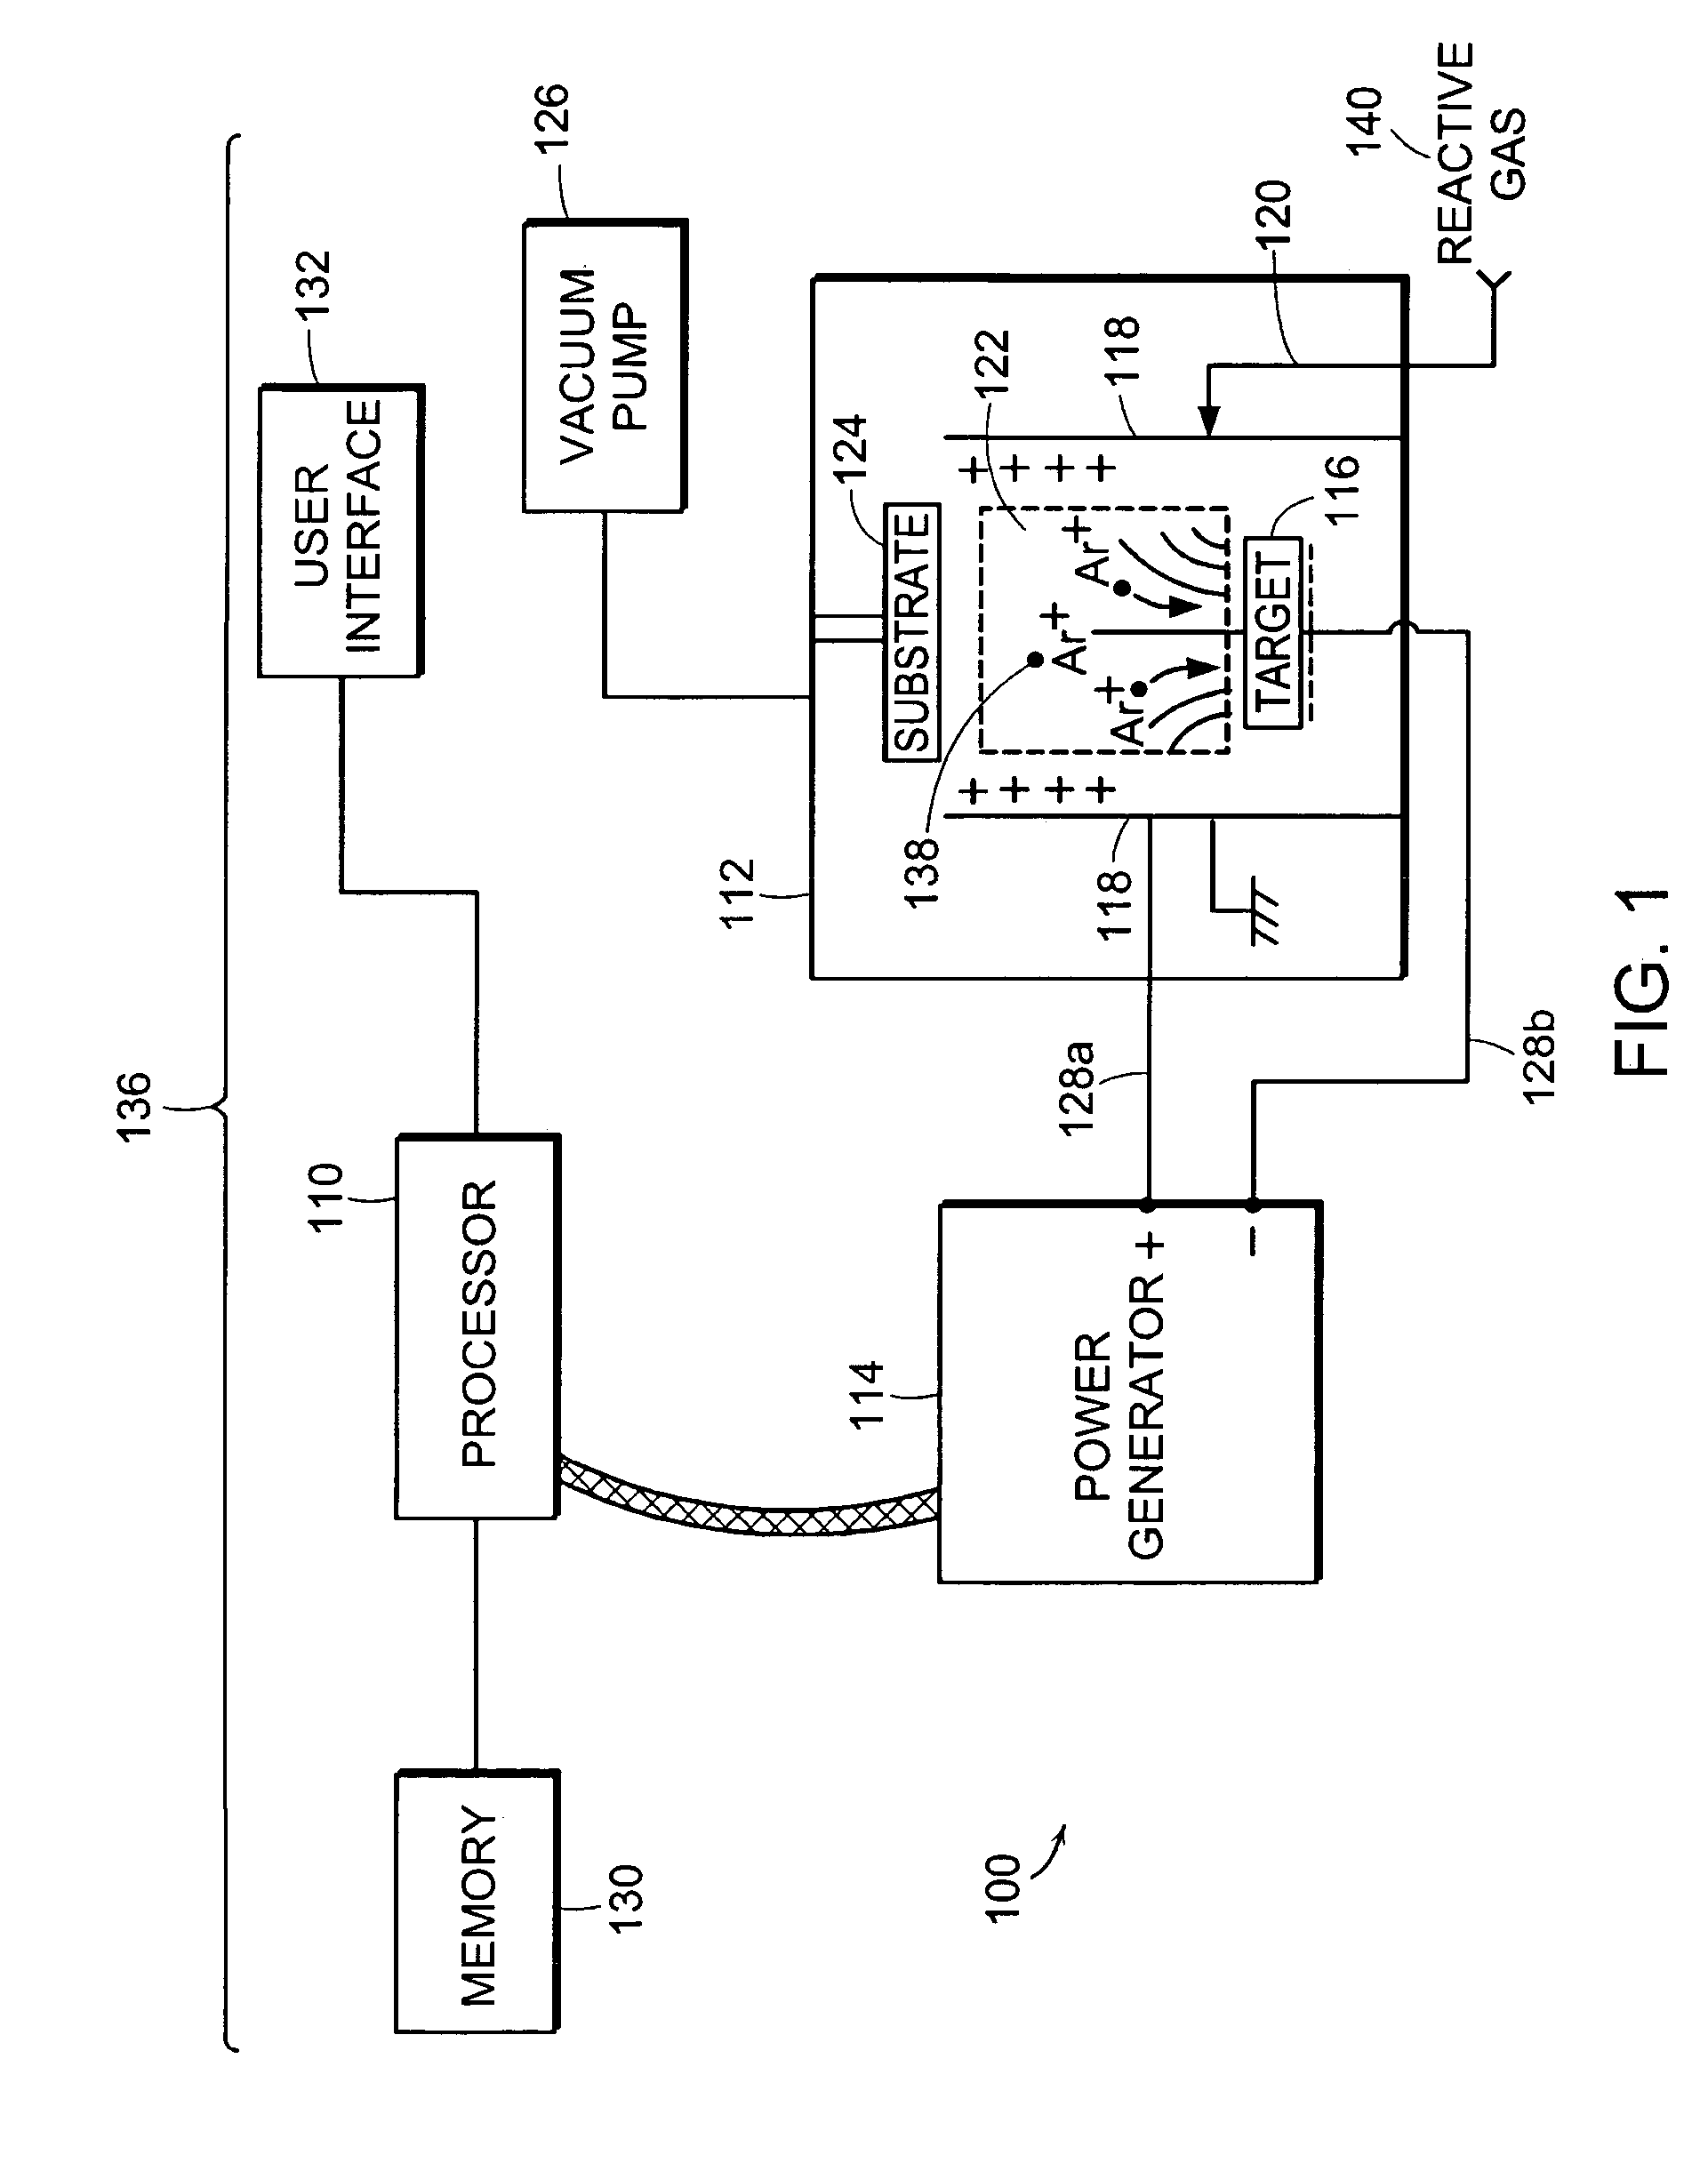 Control system for a sputtering system